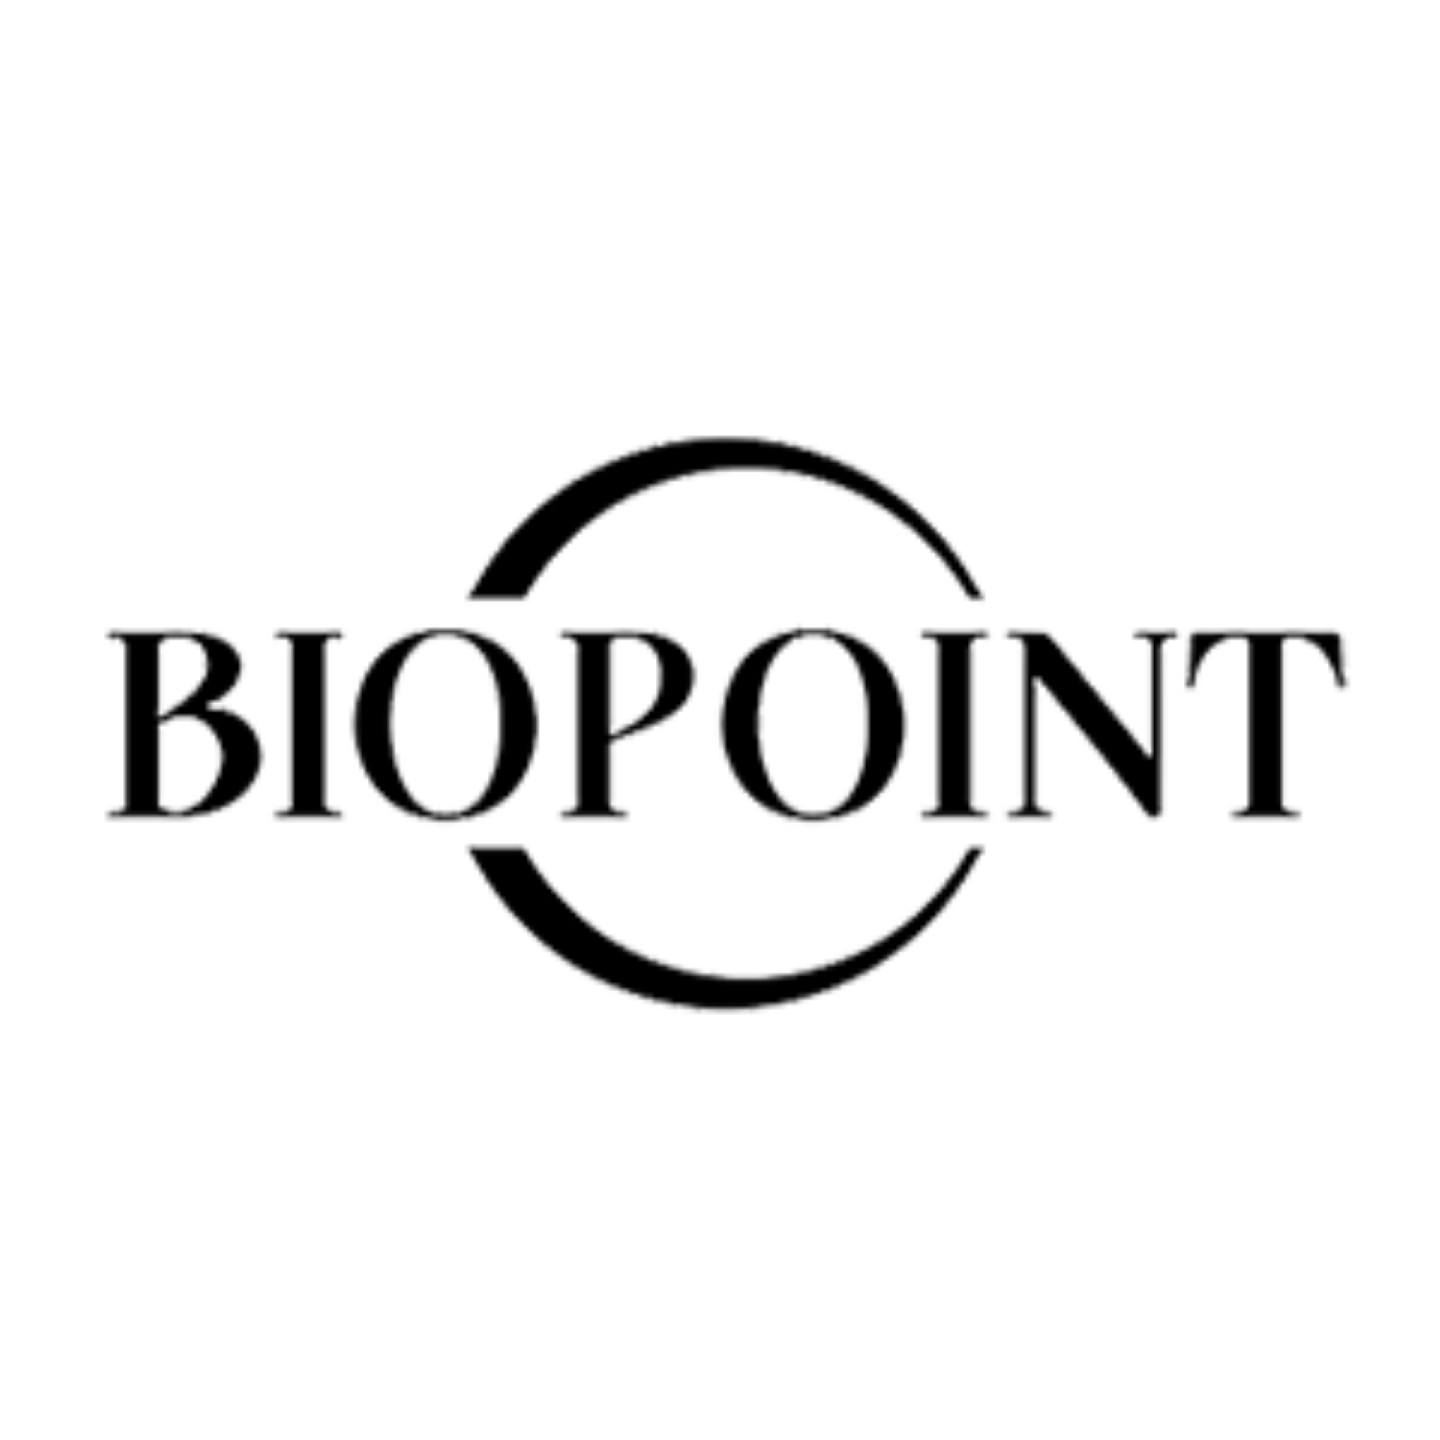 Picture for manufacturer BIOPOINT